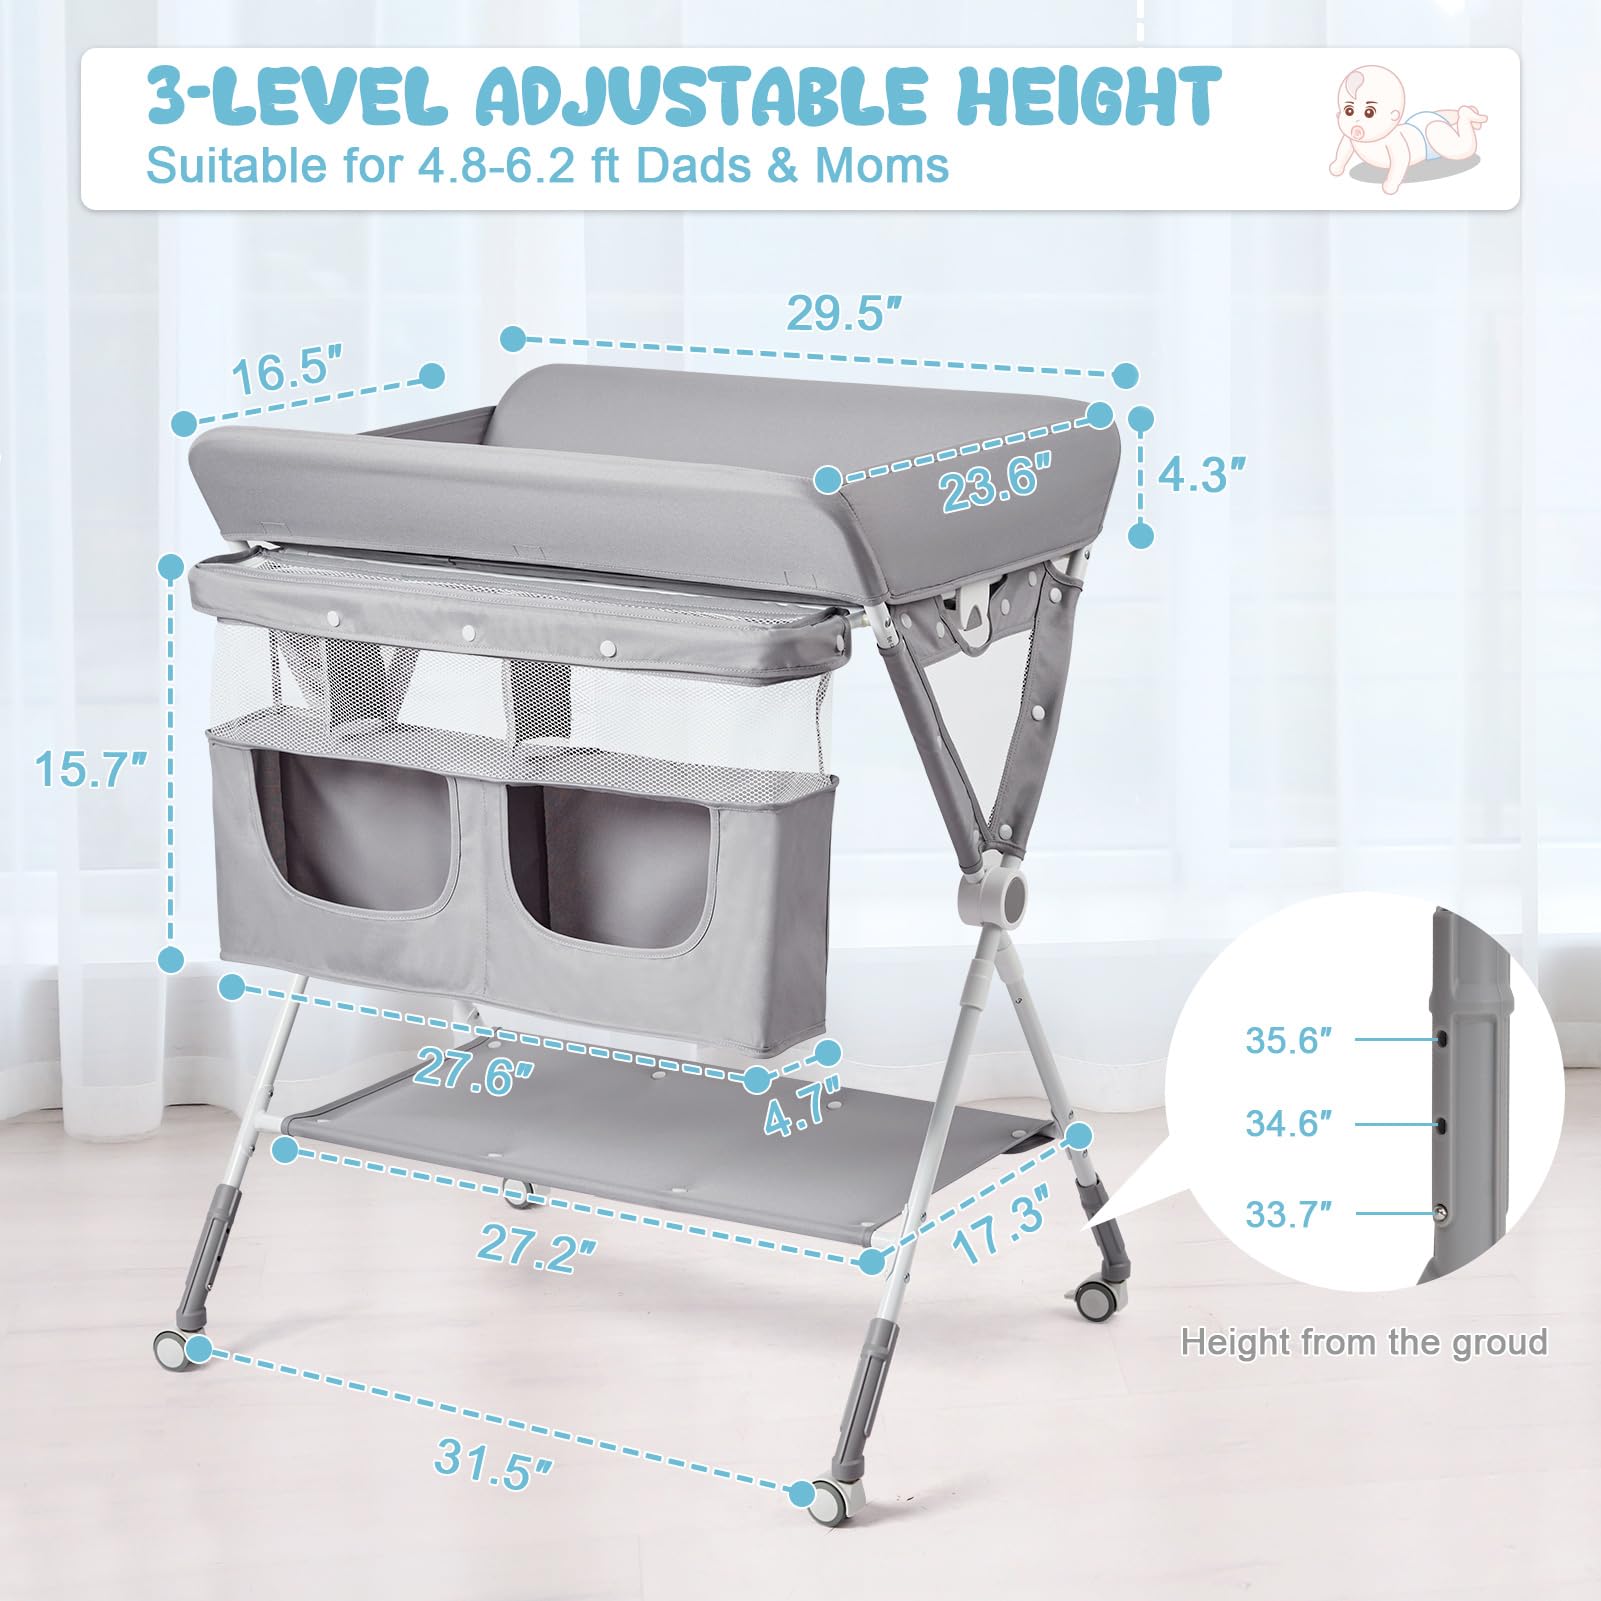 Portable Baby Changing Table, Babevy Foldable Diaper Change Table with Wheels, Adjustable Height, Cleaning Bucket, Changing Station for Infant Mobile Nursery Organizer for Newborn